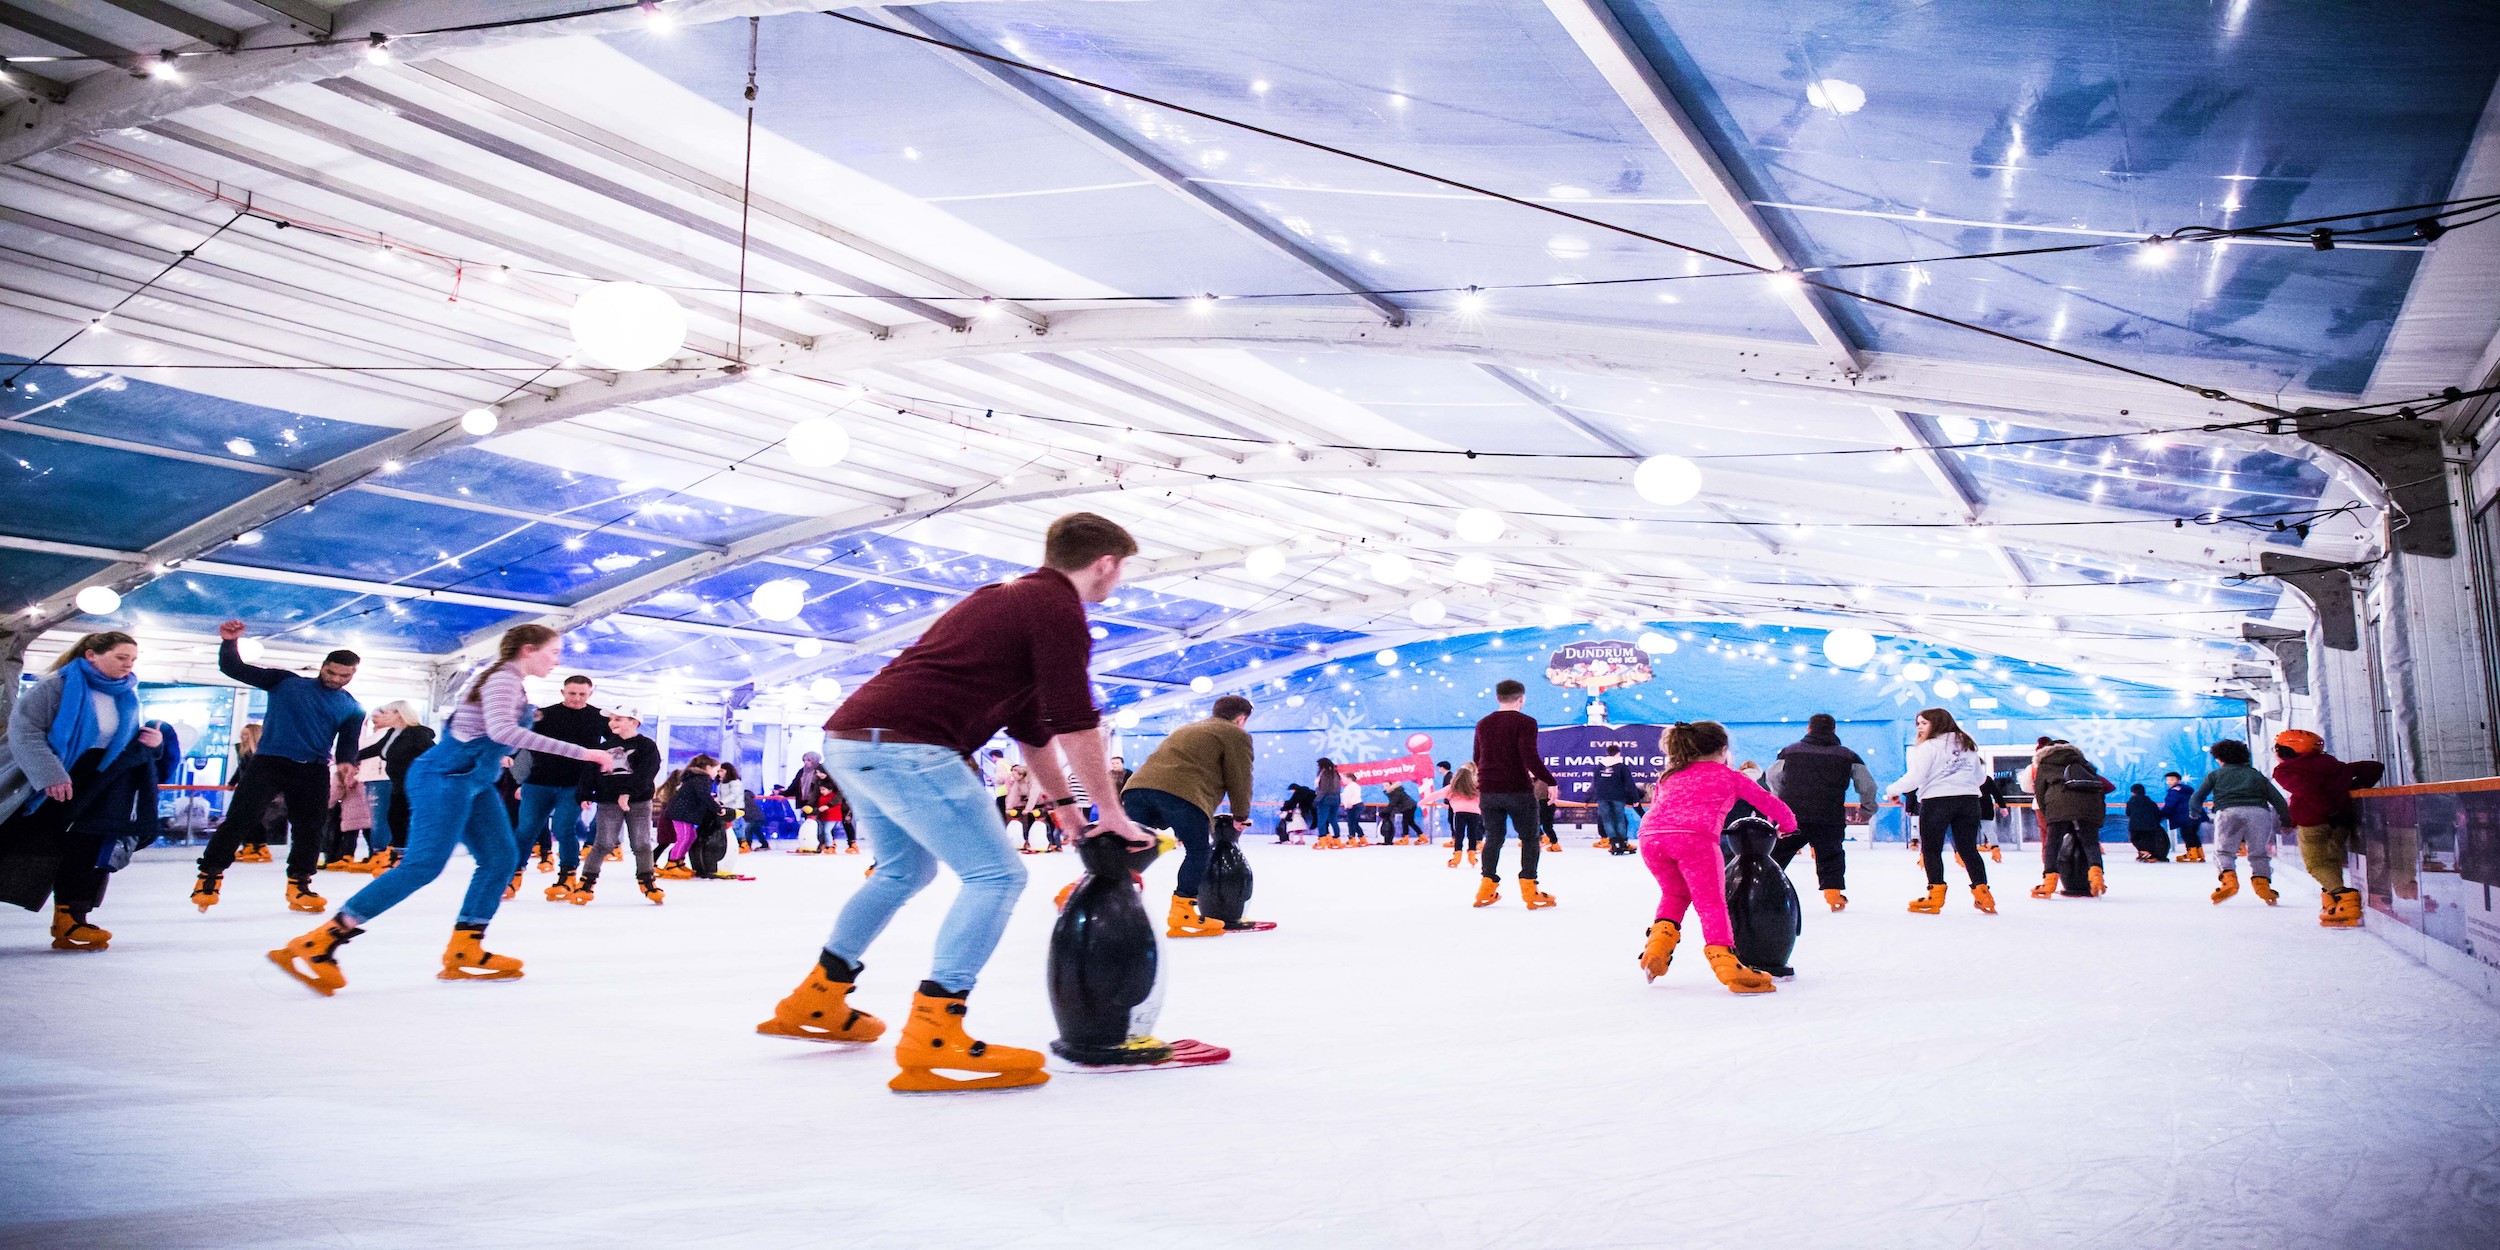 An ice rink being enjoyed by the public.